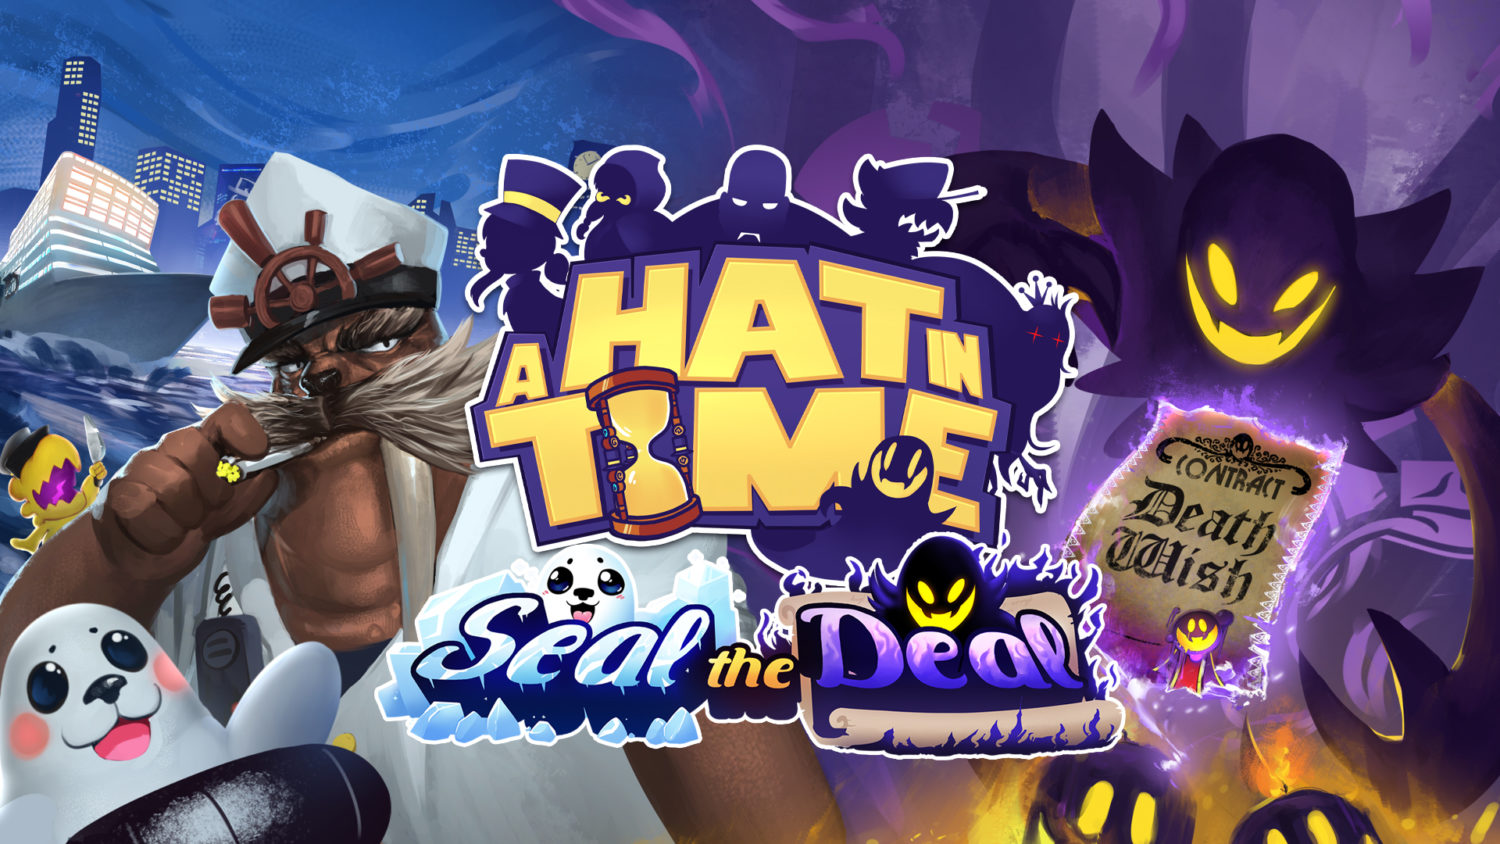 A Hat in time - Seal the Deal - Nintendo Switch eShop